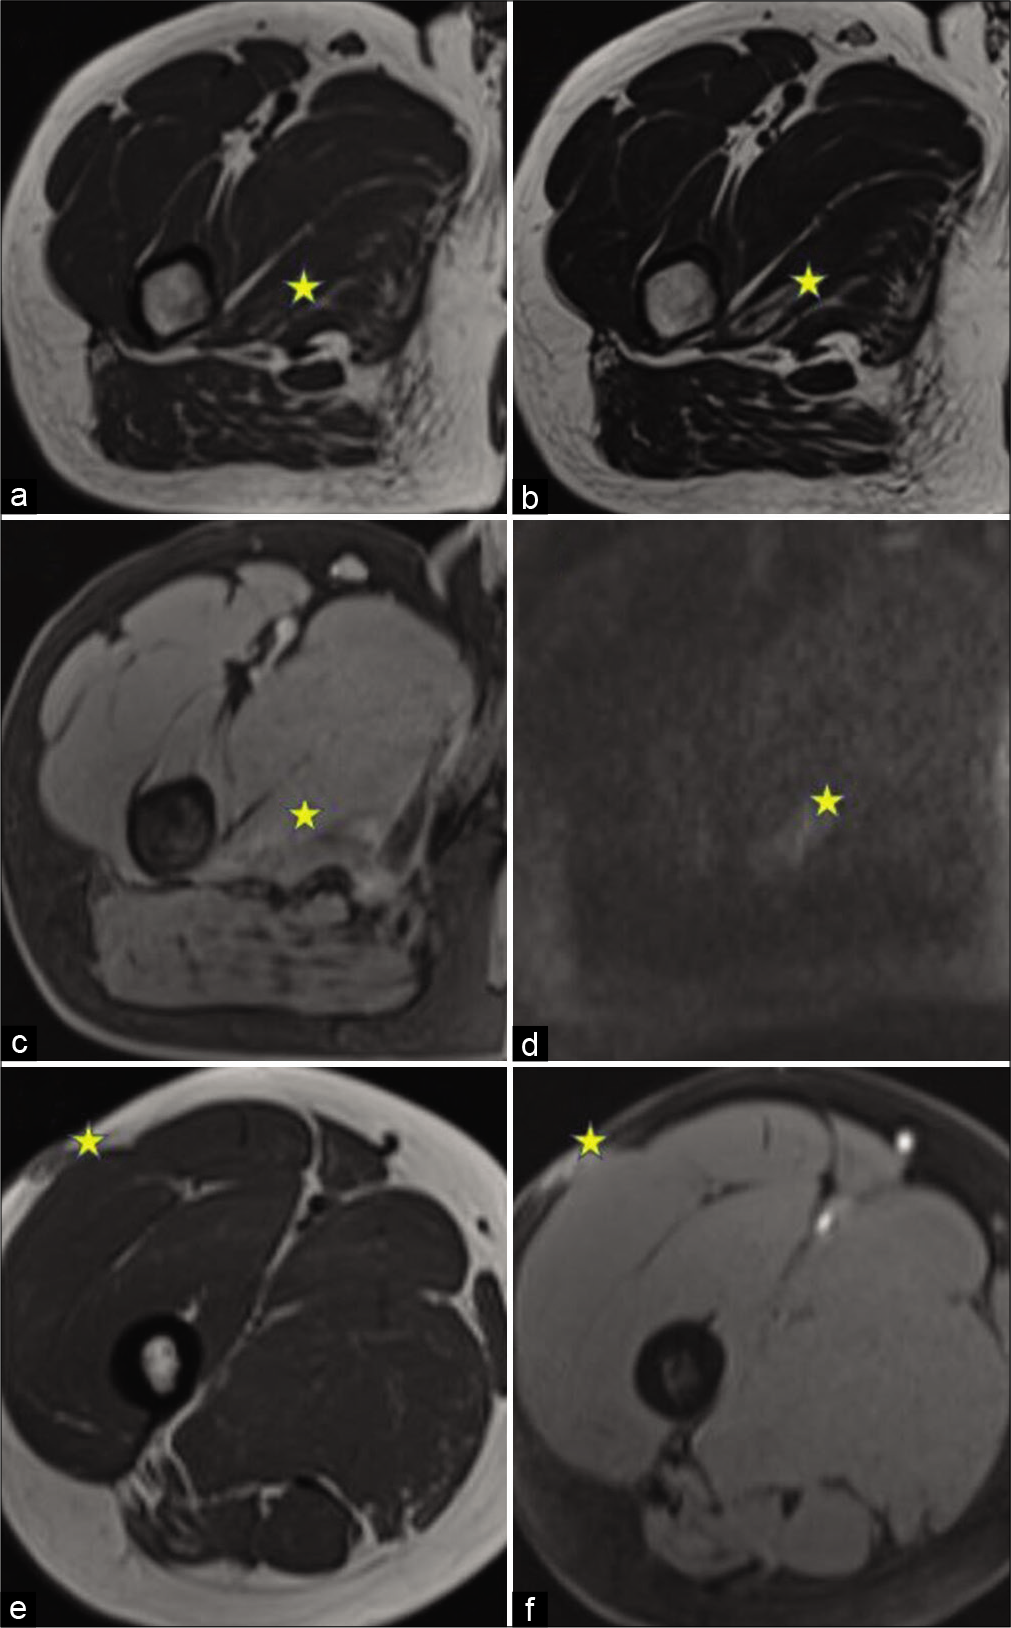 A 35-year-old man with swelling in the right thigh. magnetic resonance imaging of the lesion. The lesion is marked with stars. (a) Axial T1WI shows a lesion within the right adductor magnus muscle, with central iso- to hypointense and peripheral hyperintense signal. (b) Axial T2WI shows a hyperintense signal in the lesion with the central hypointense signal. (c) Axial T1W post-contrast image shows Mild peripheral enhancement. (d) Axial DWI, showing: Patchy areas of diffusion restriction. (e) Axial T1WI showing the primary subcutaneous lesion with heterogeneous post-gadolinium enhancement (f).